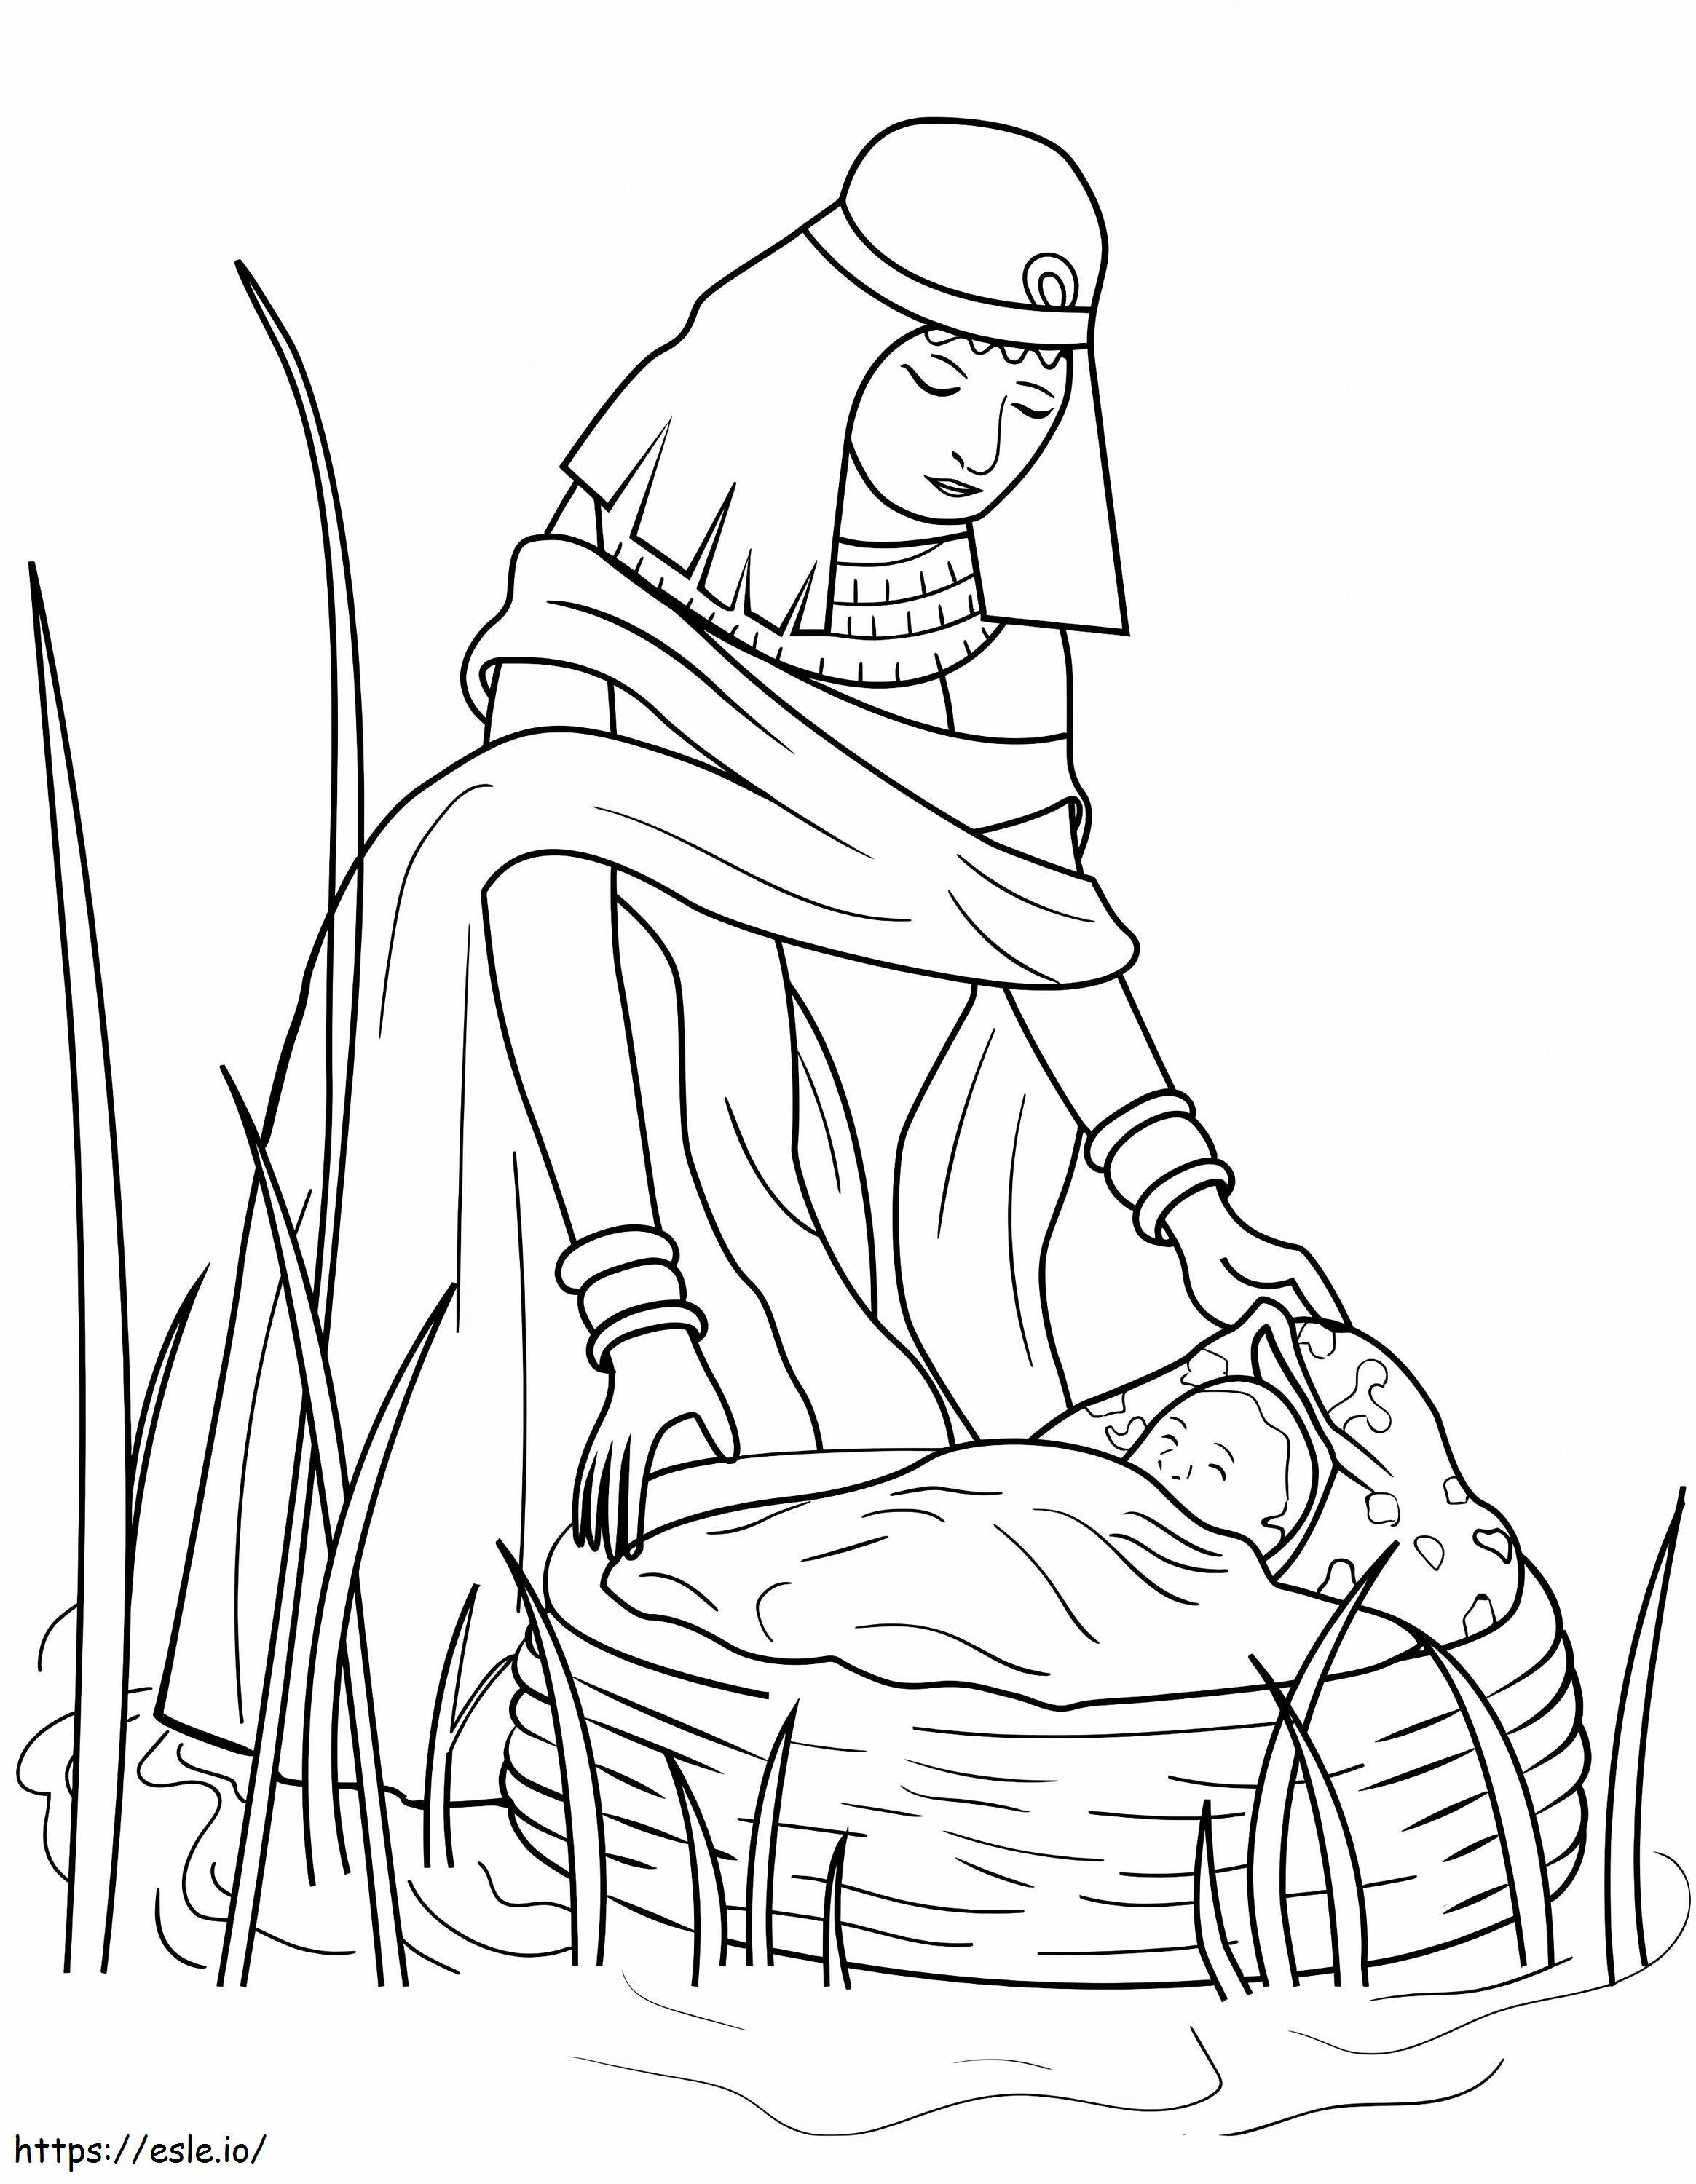 Miriam And Baby Moses coloring page